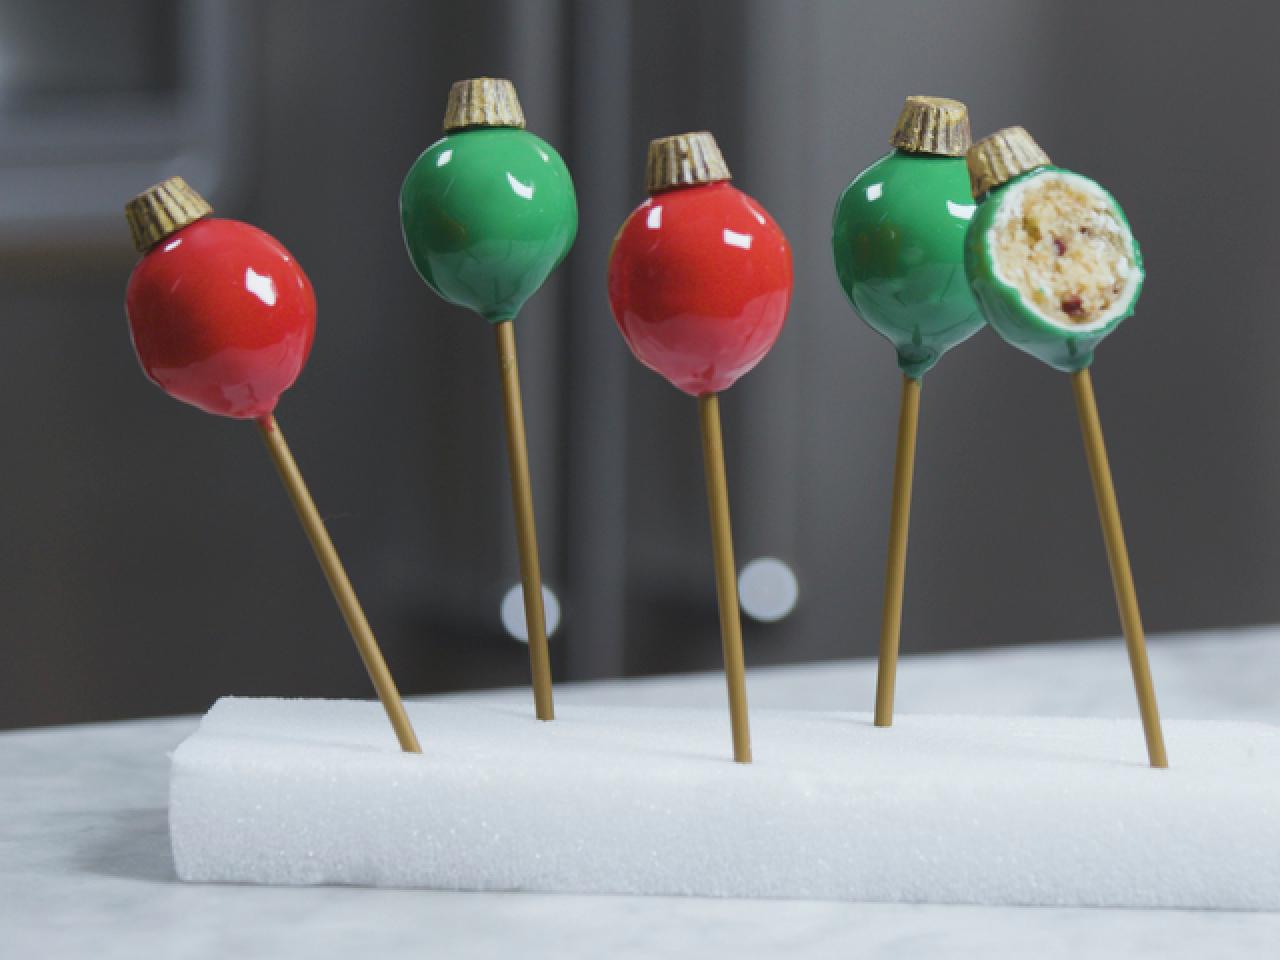 Cake Pop Decorating Stand 11 1/4 - Holds 24 Cake Pops